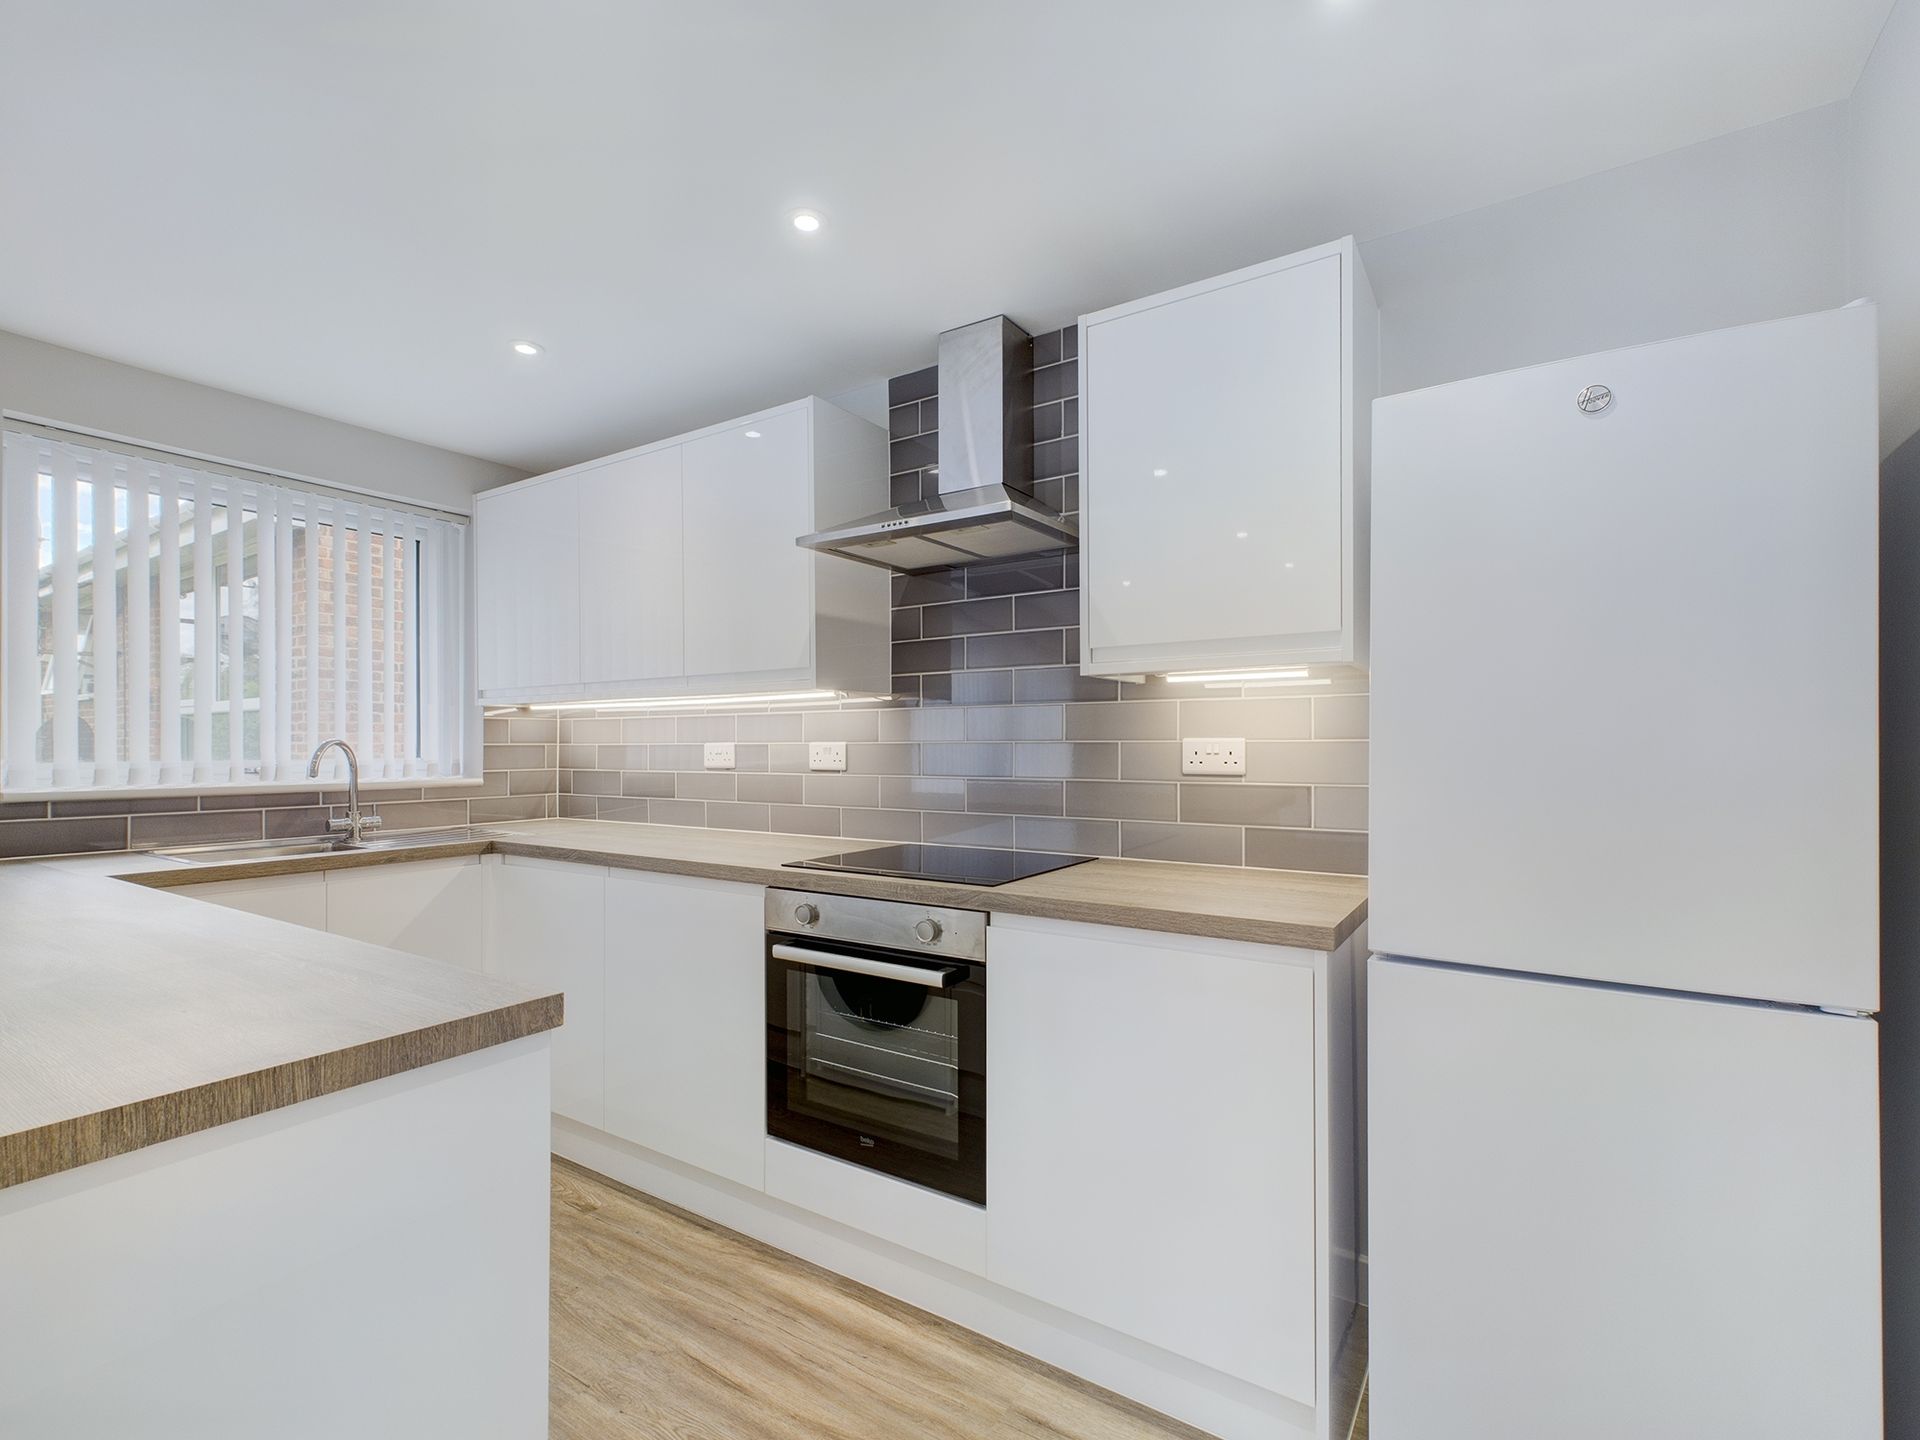 1 bed flat to rent reading open plan kitchen 